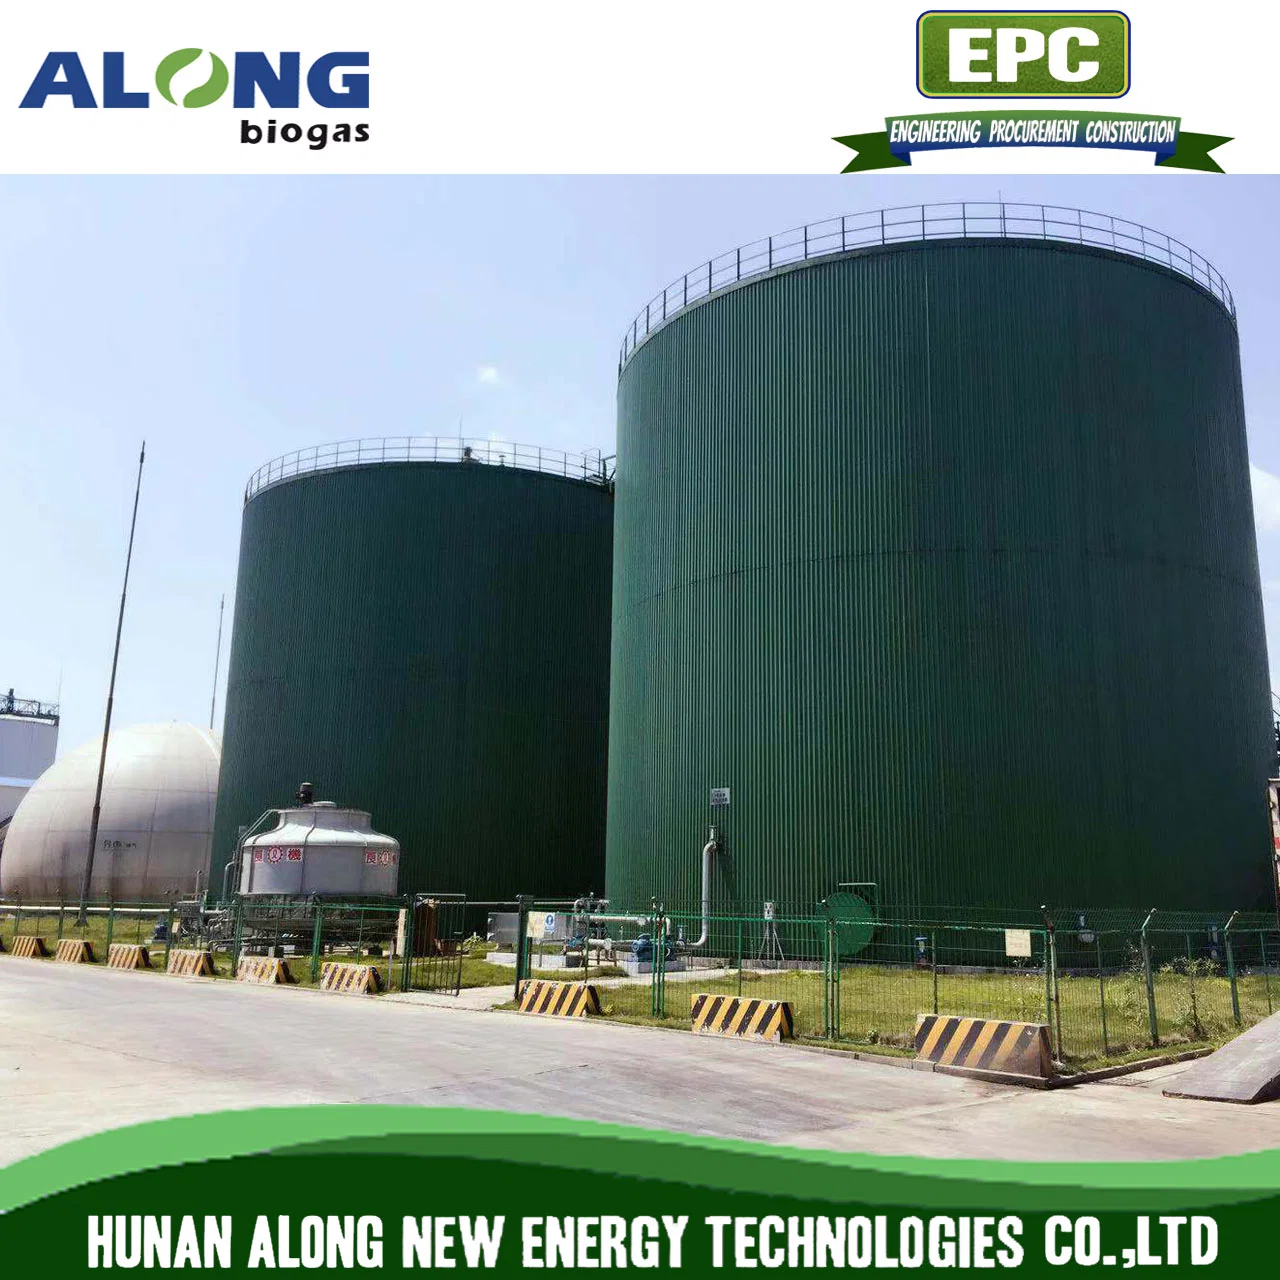 Biogas Project-Complete Design Implementation and Construction of Biogas Plant